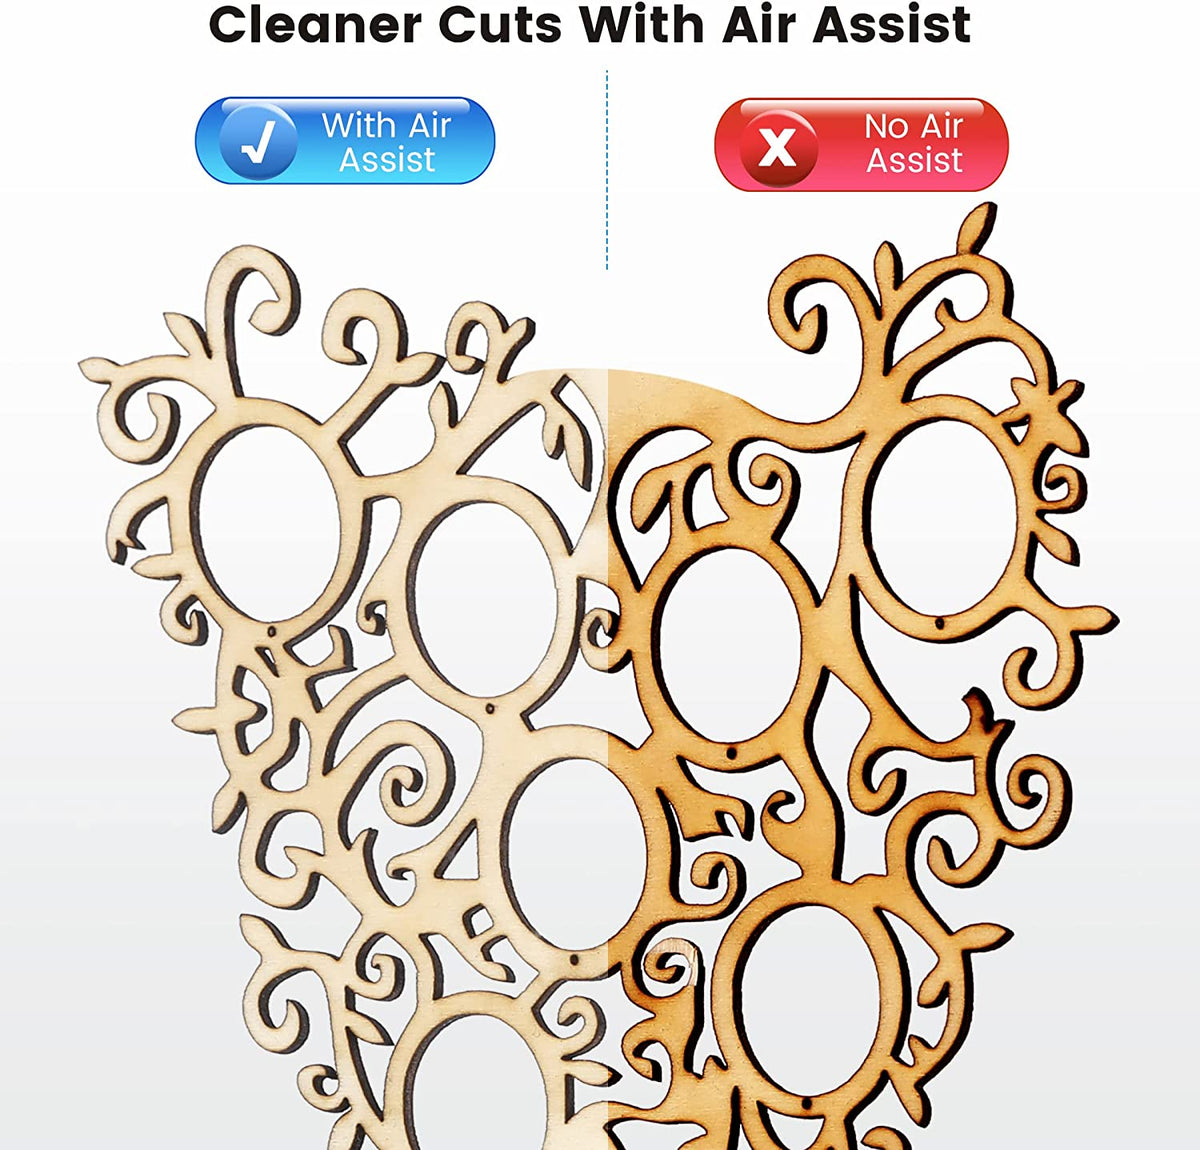 the engravement has cleaner cuts with comgrow air assistant